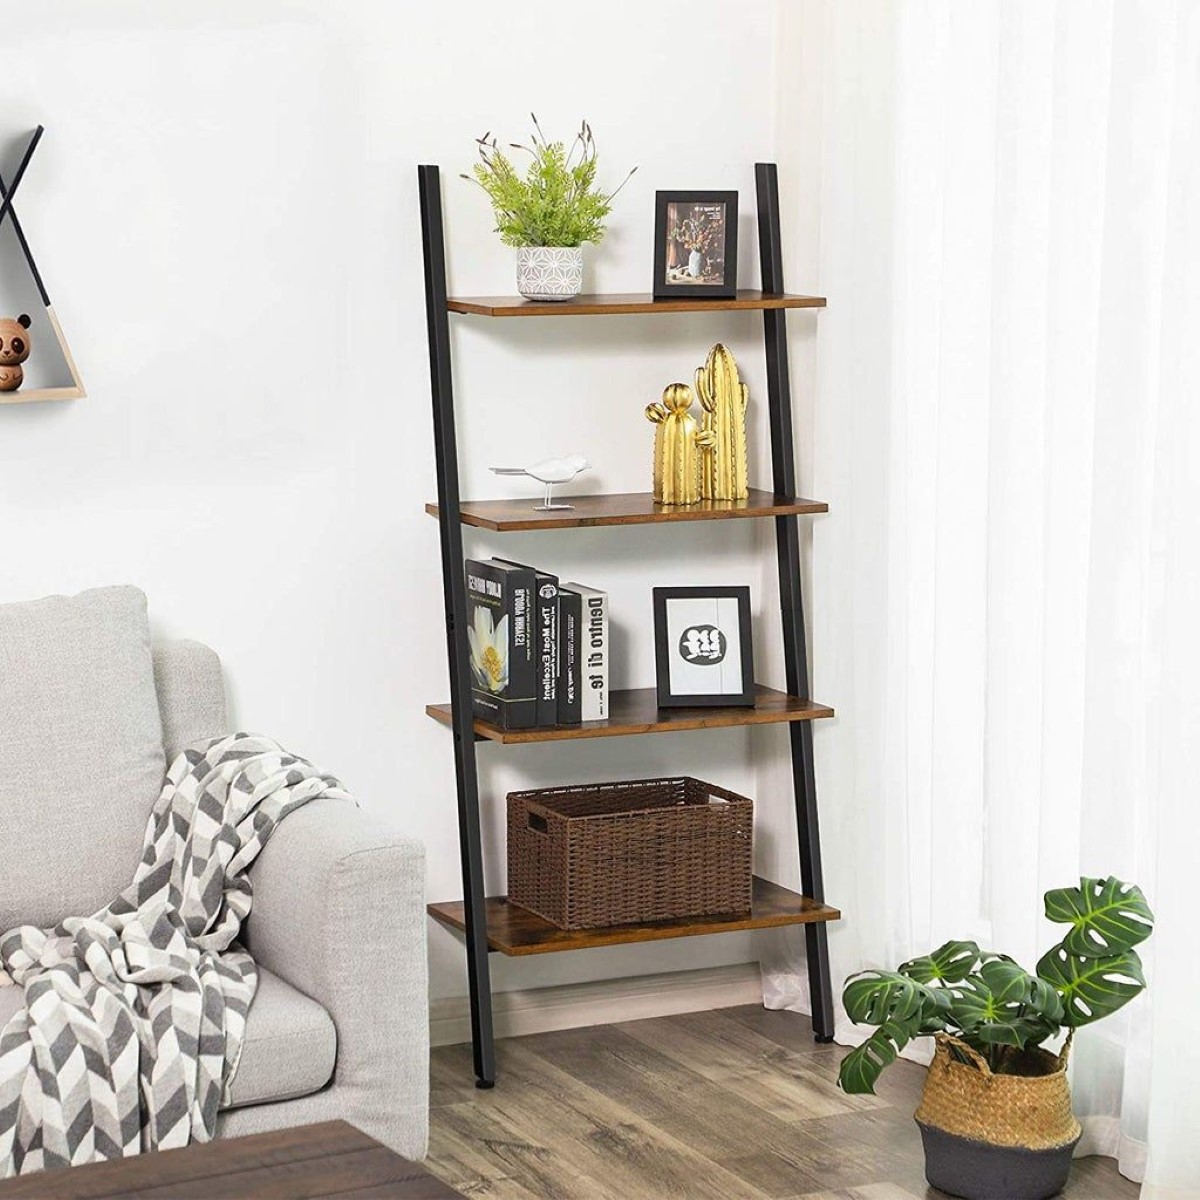 How To Decorate Ladder Shelves